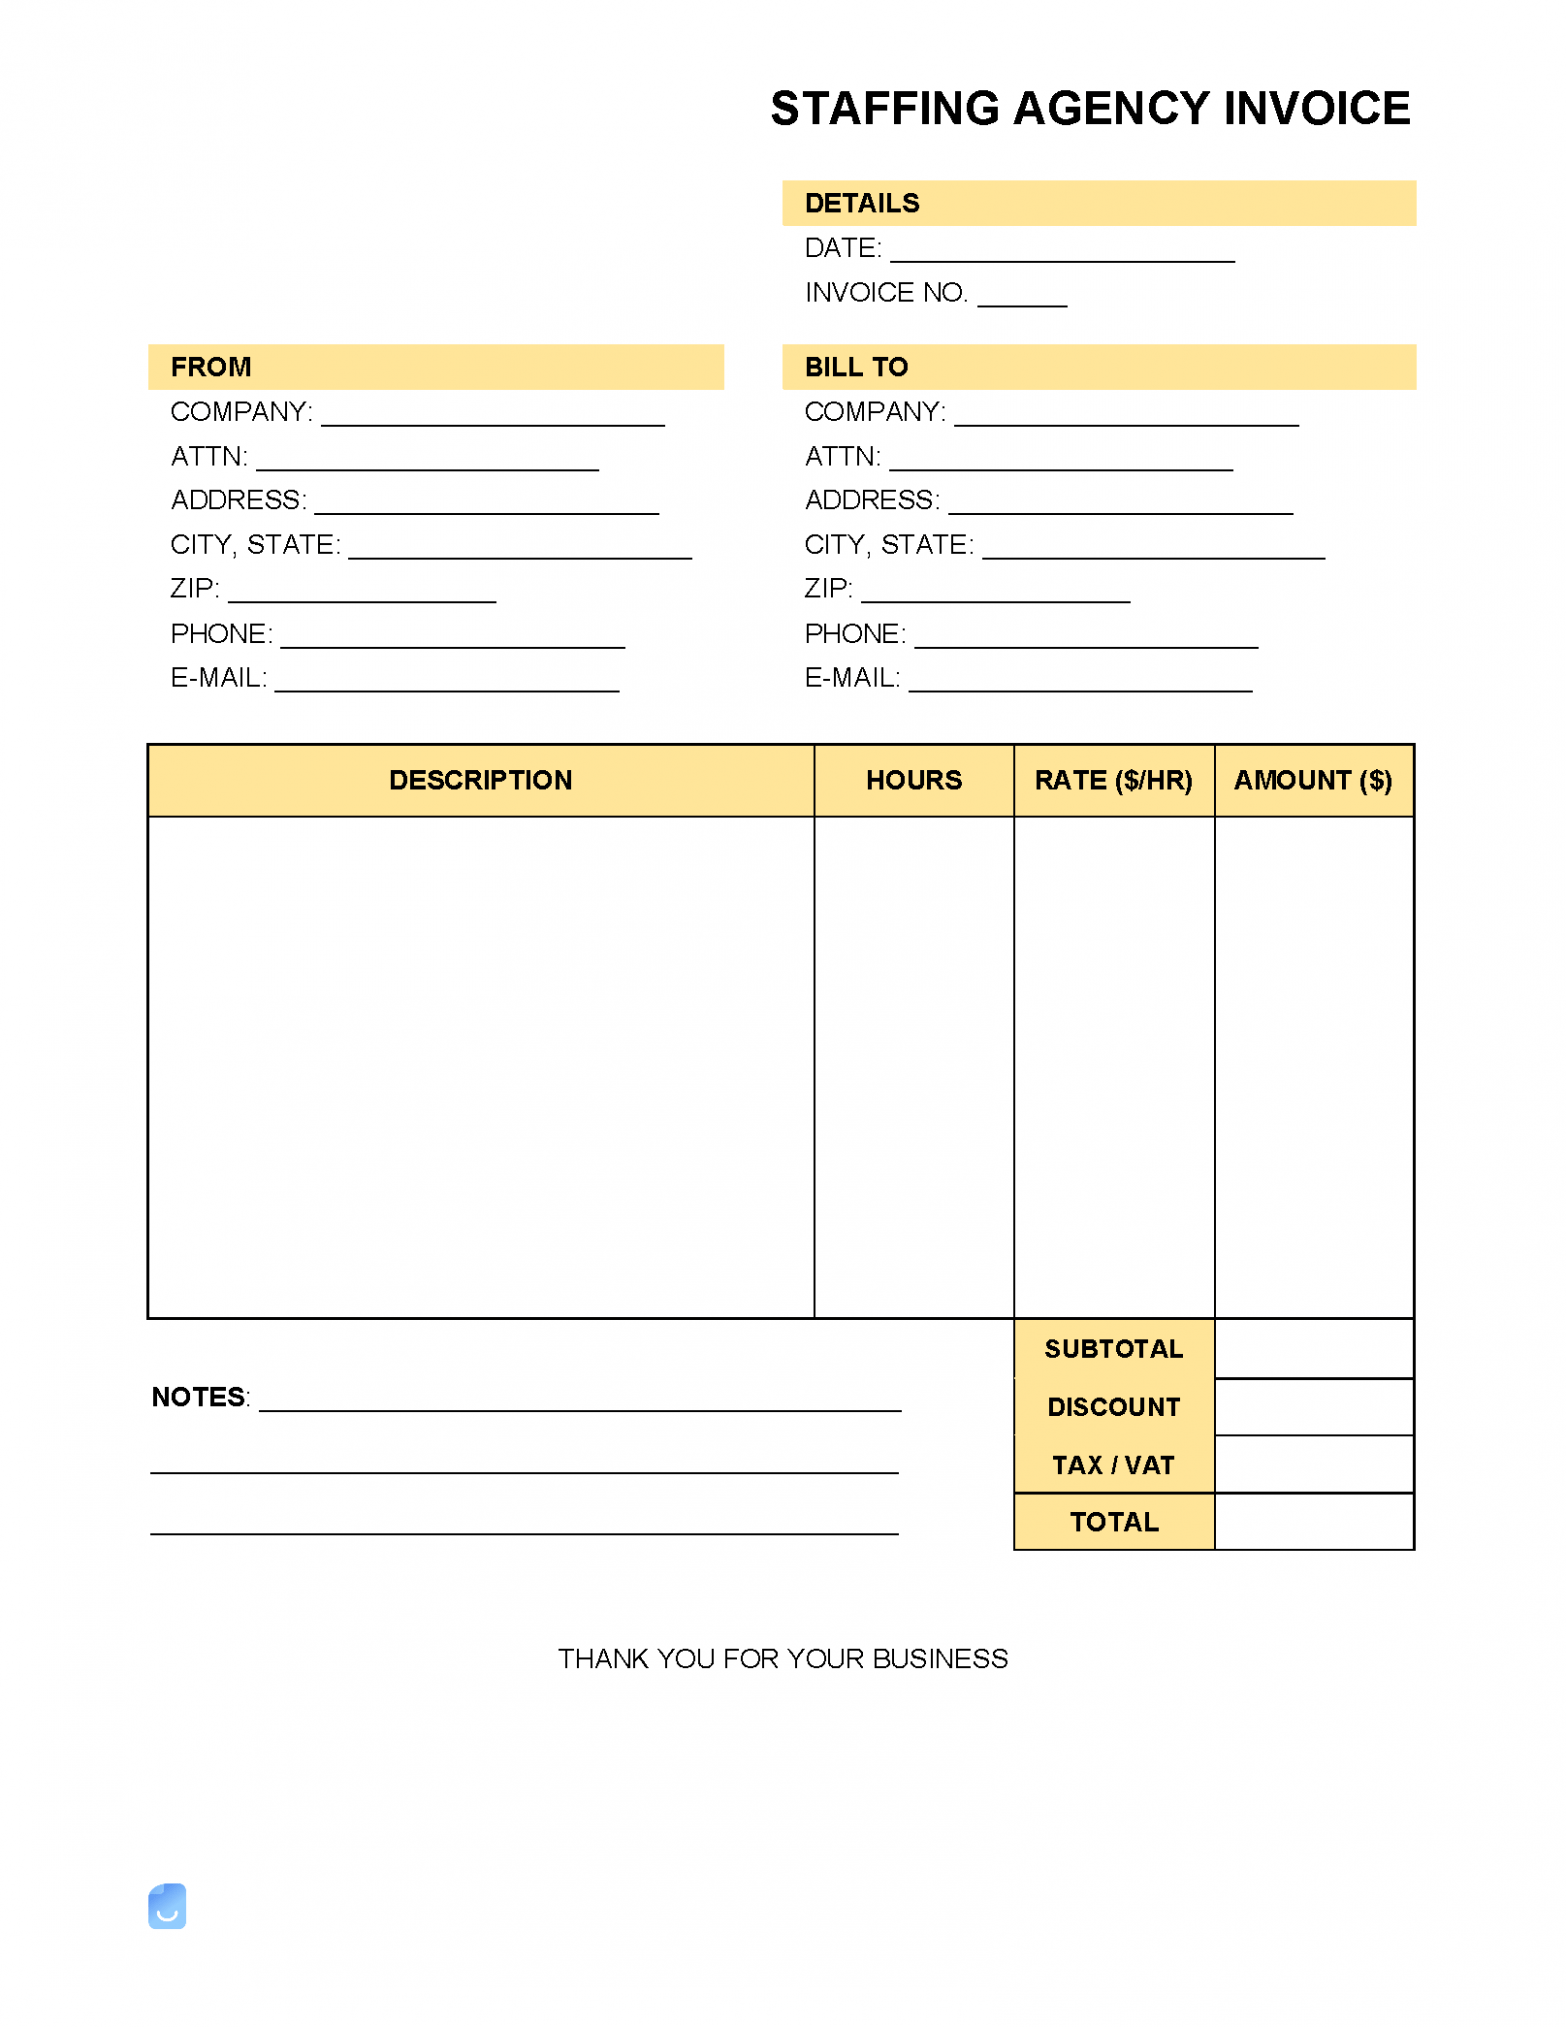 Editable Staffing Invoice Template Excel